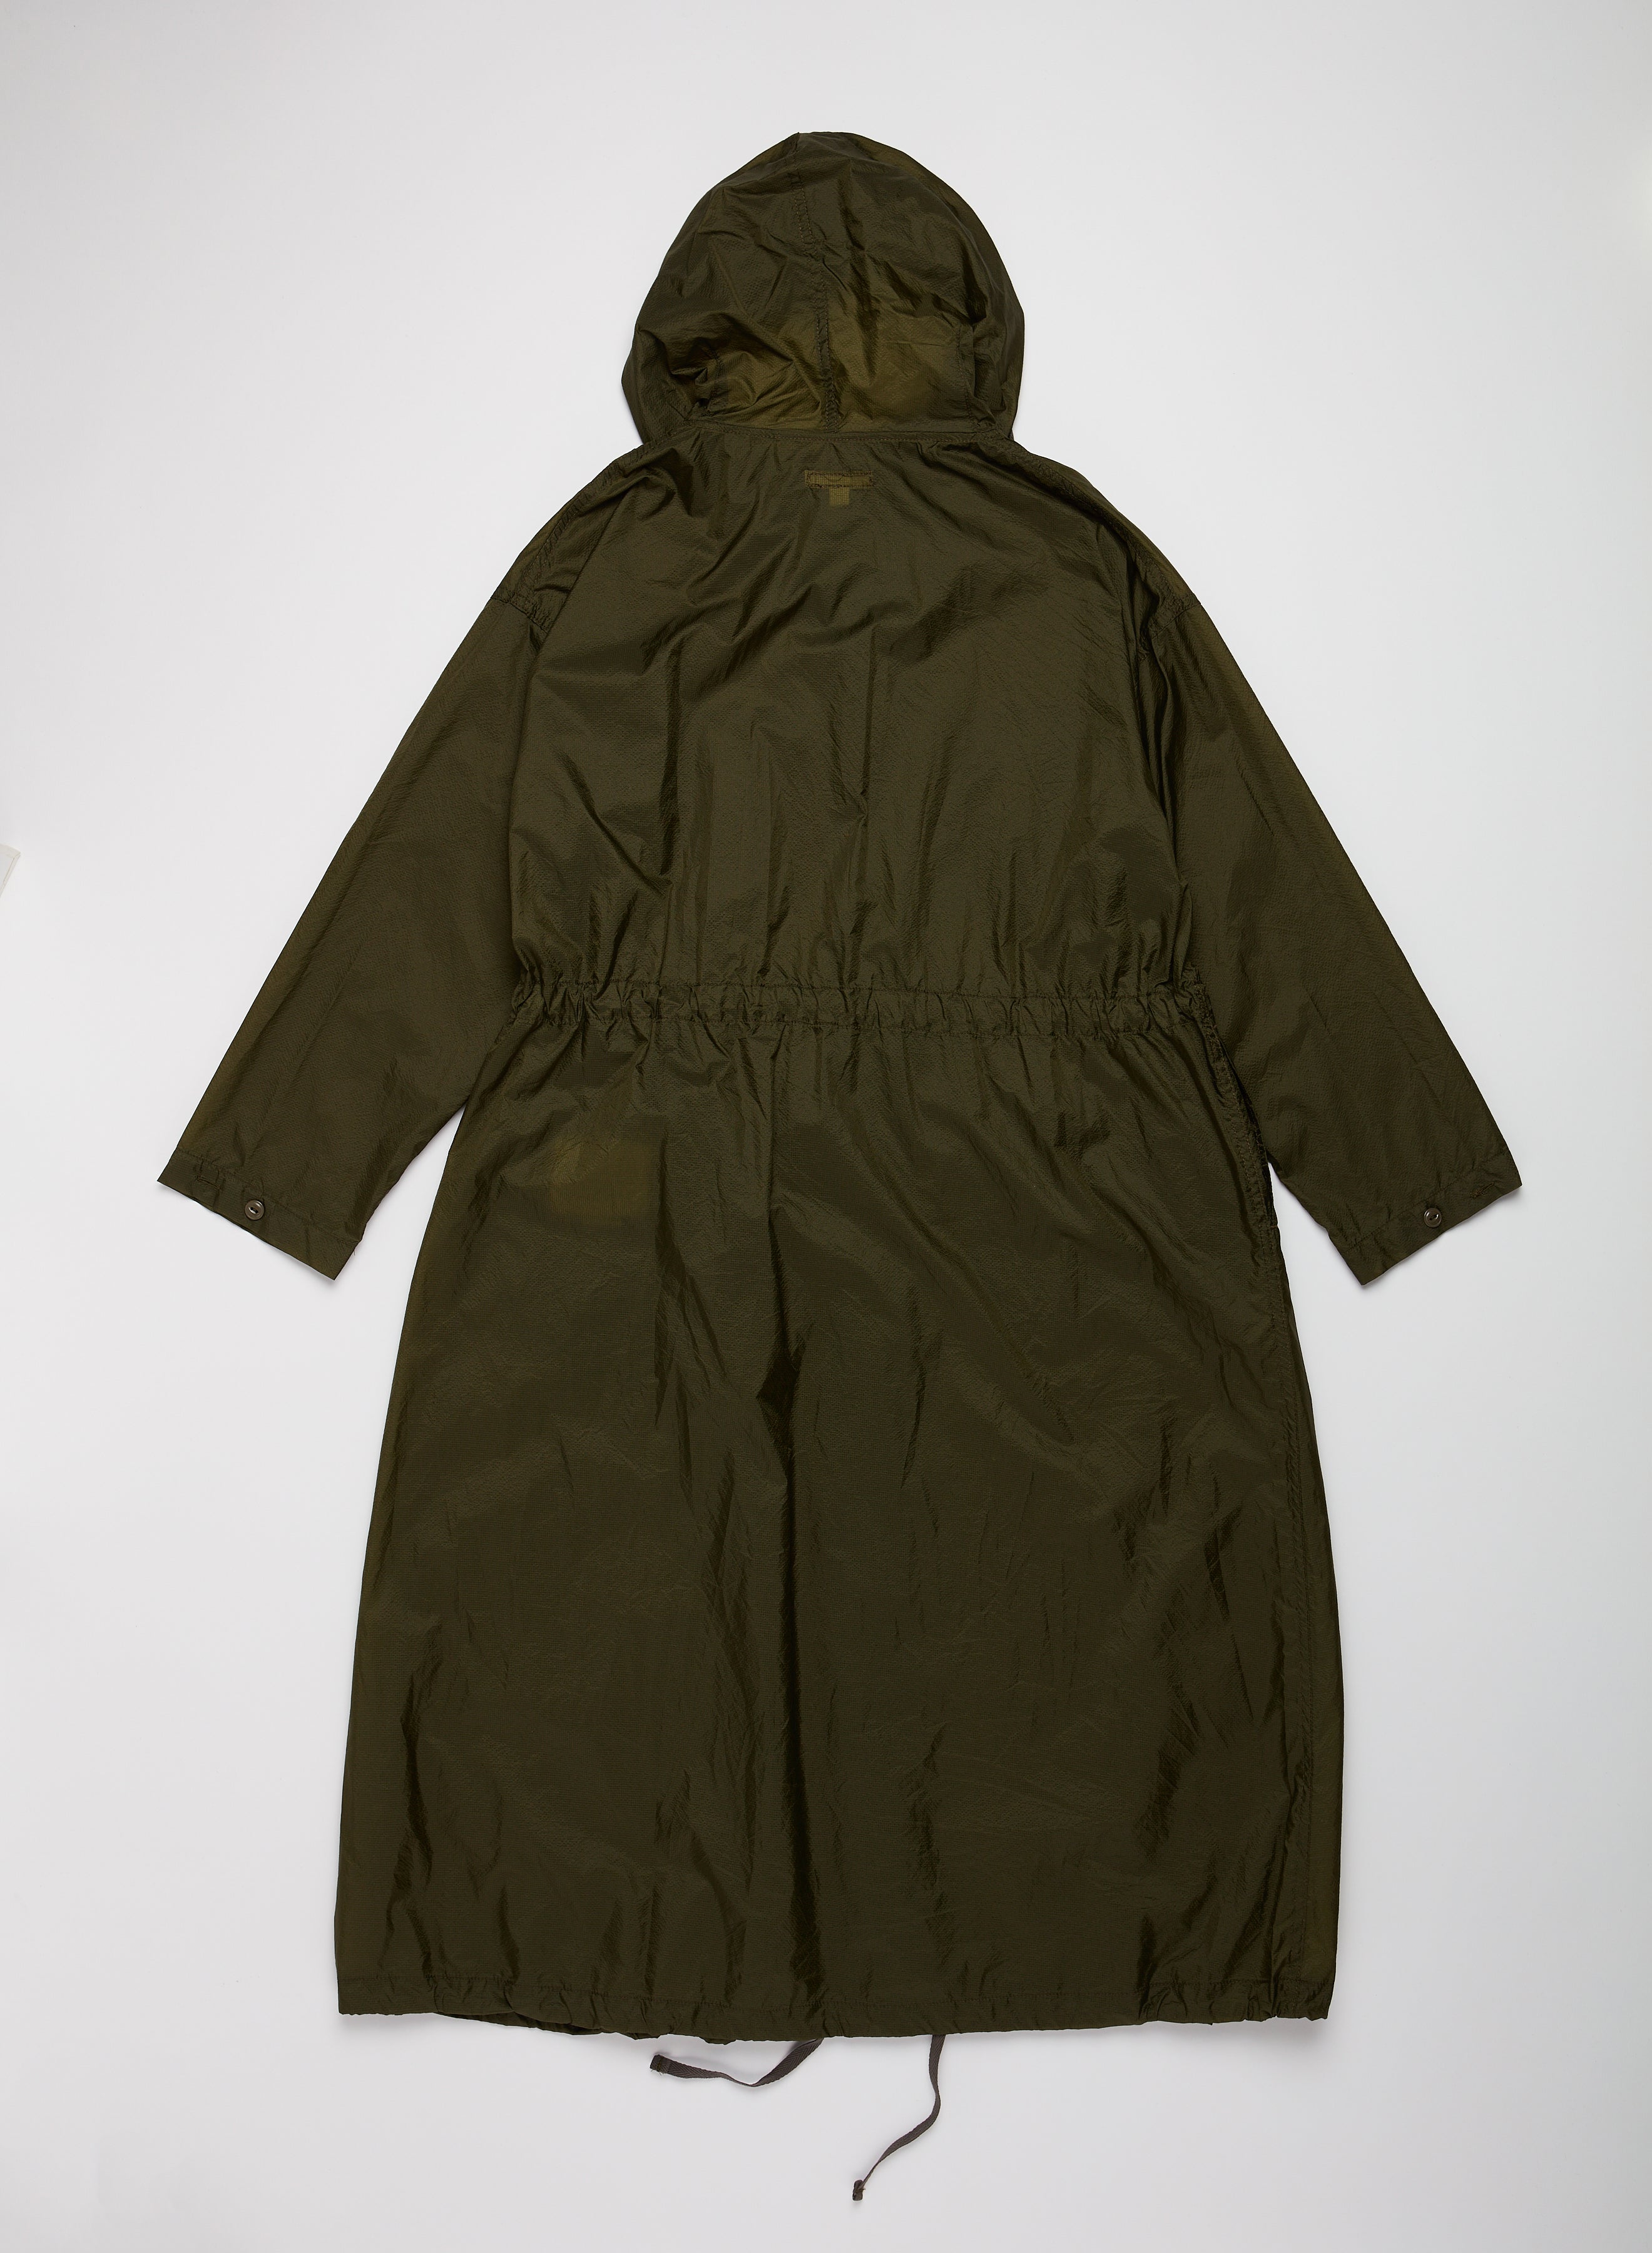 Engineered Garments Cagoule Dress - Olive Nylon Micro Ripstop